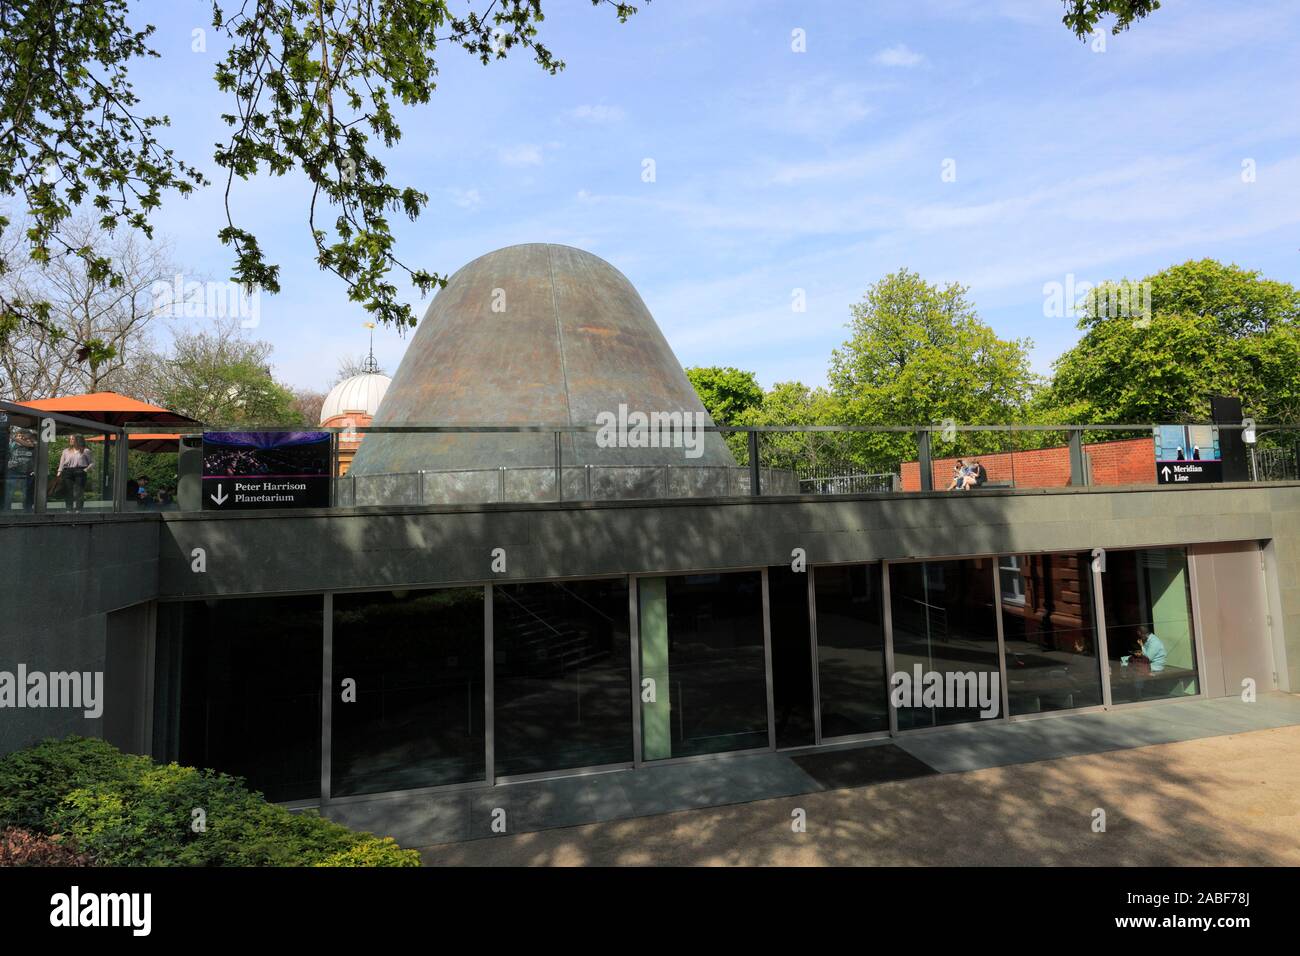 View of the Peter Harrison Planetarium, Royal Observatory, Greenwich, London, England Stock Photo